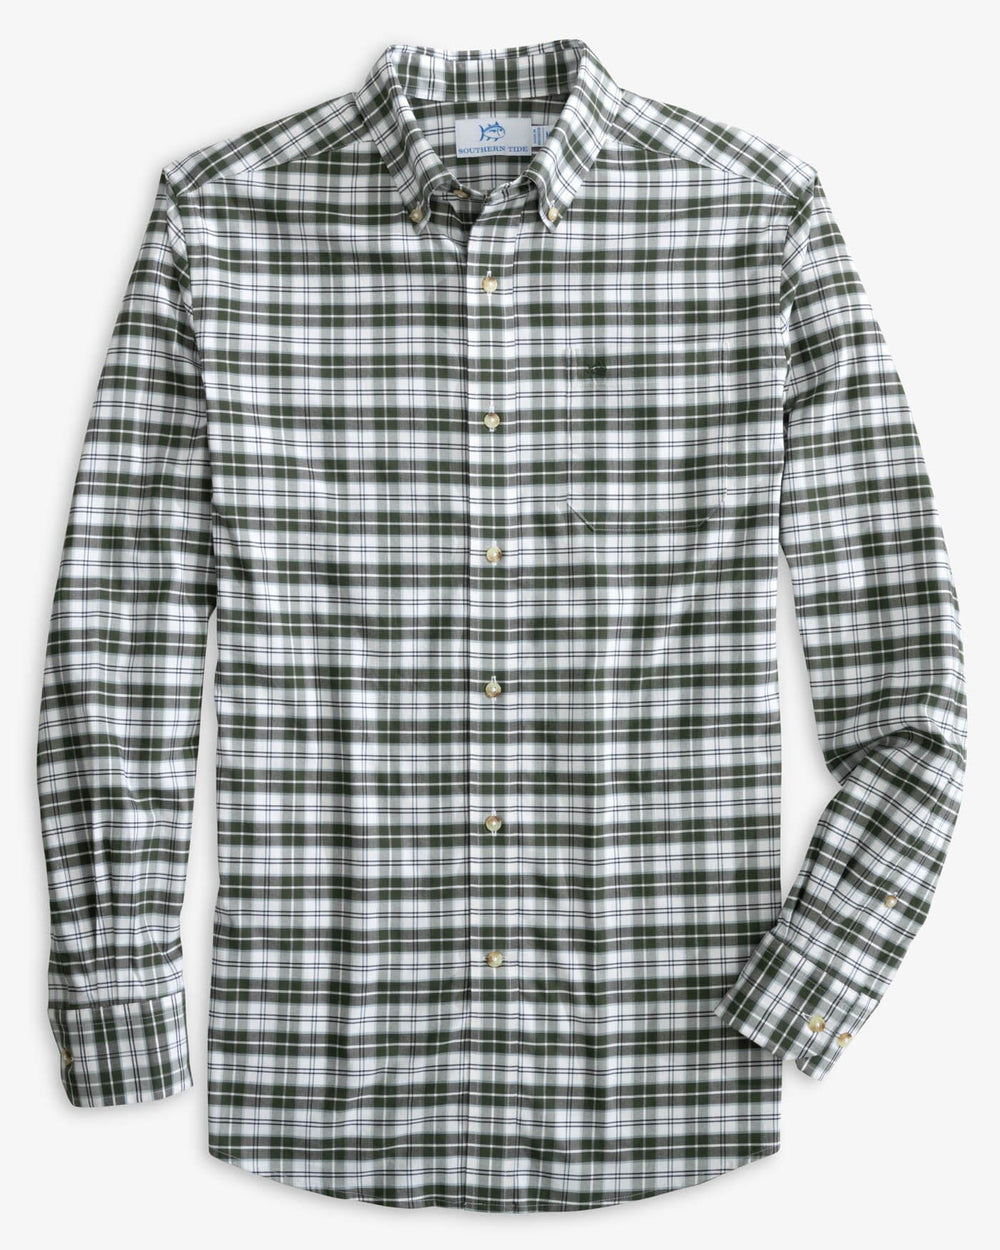 The front view of the Southern Tide Coastal Passage Dearview Plaid Sport Shirt by Southern Tide - Gulf Green